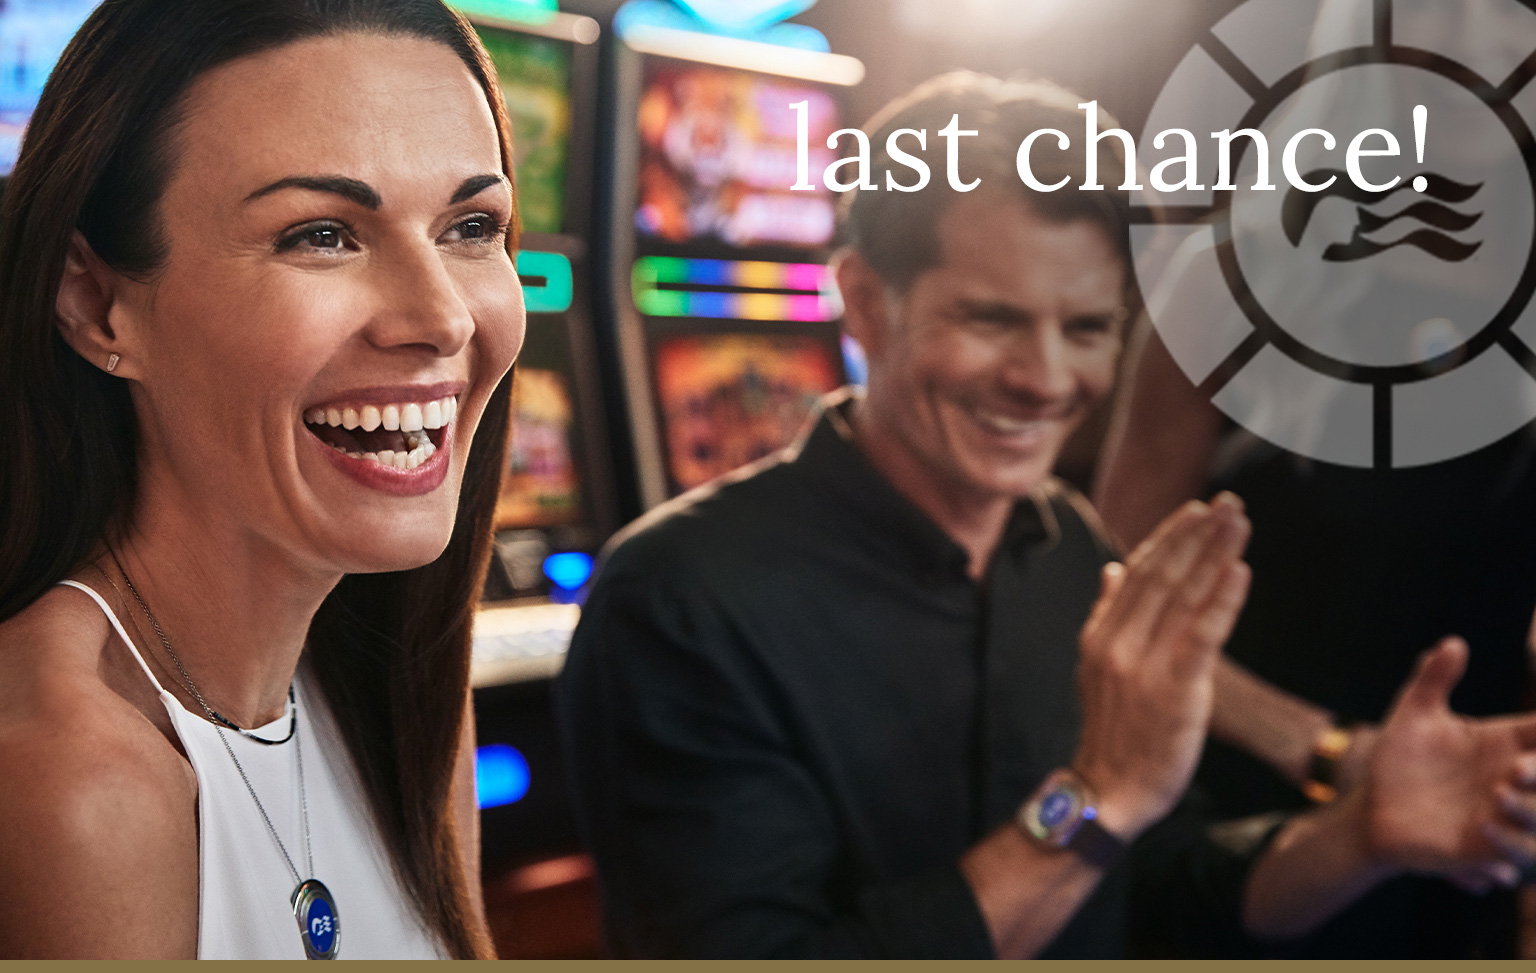 A man and woman laughing in the casino